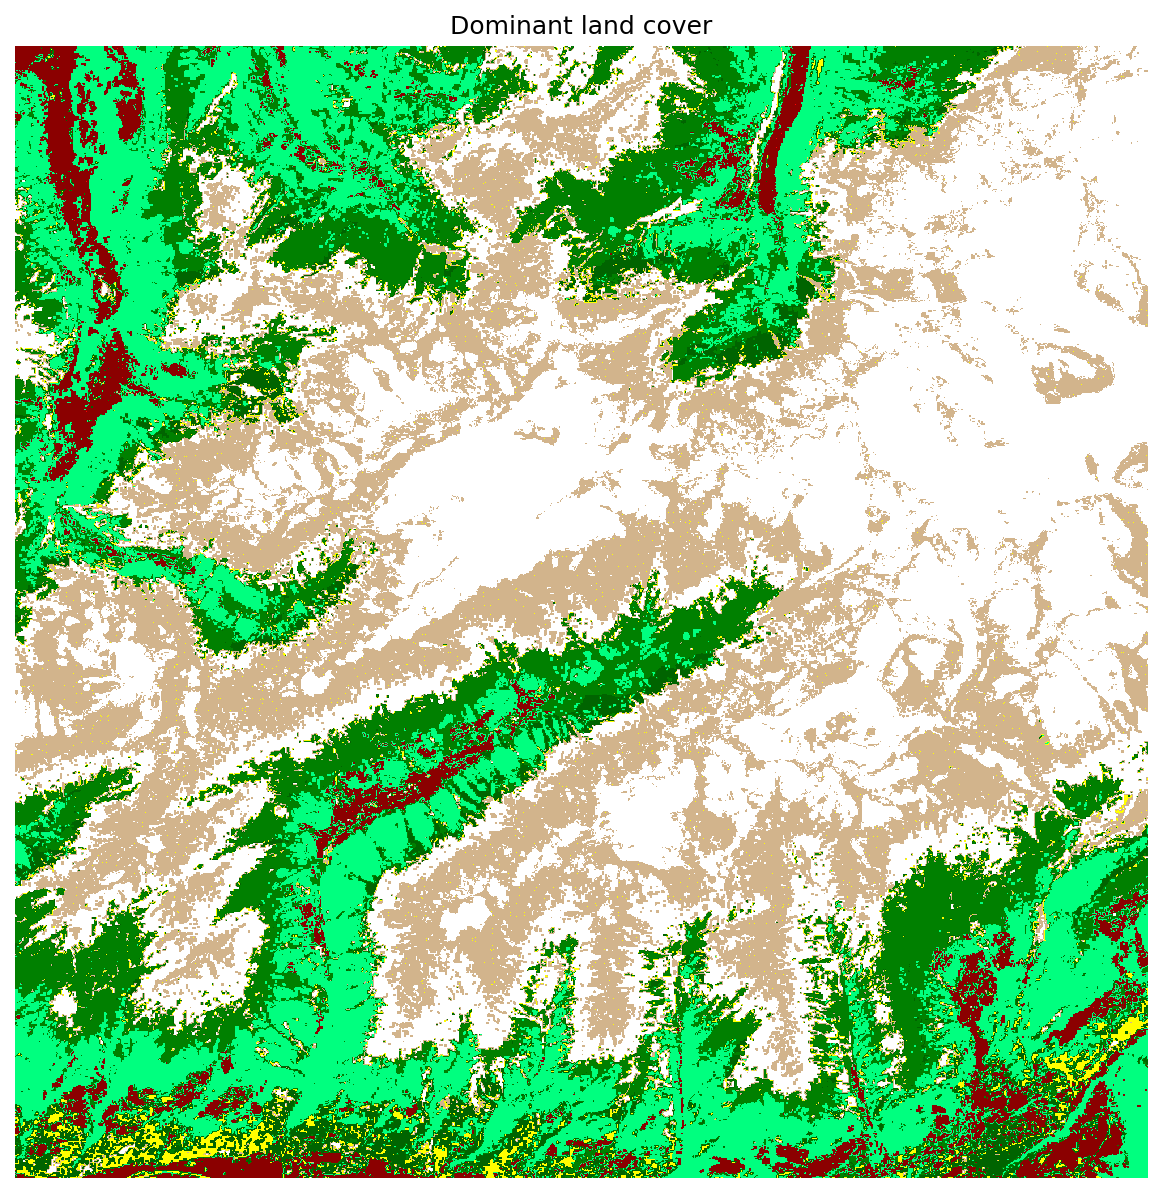 ../_images/notebooks_04_landcover_mapping_advanced_49_1.png